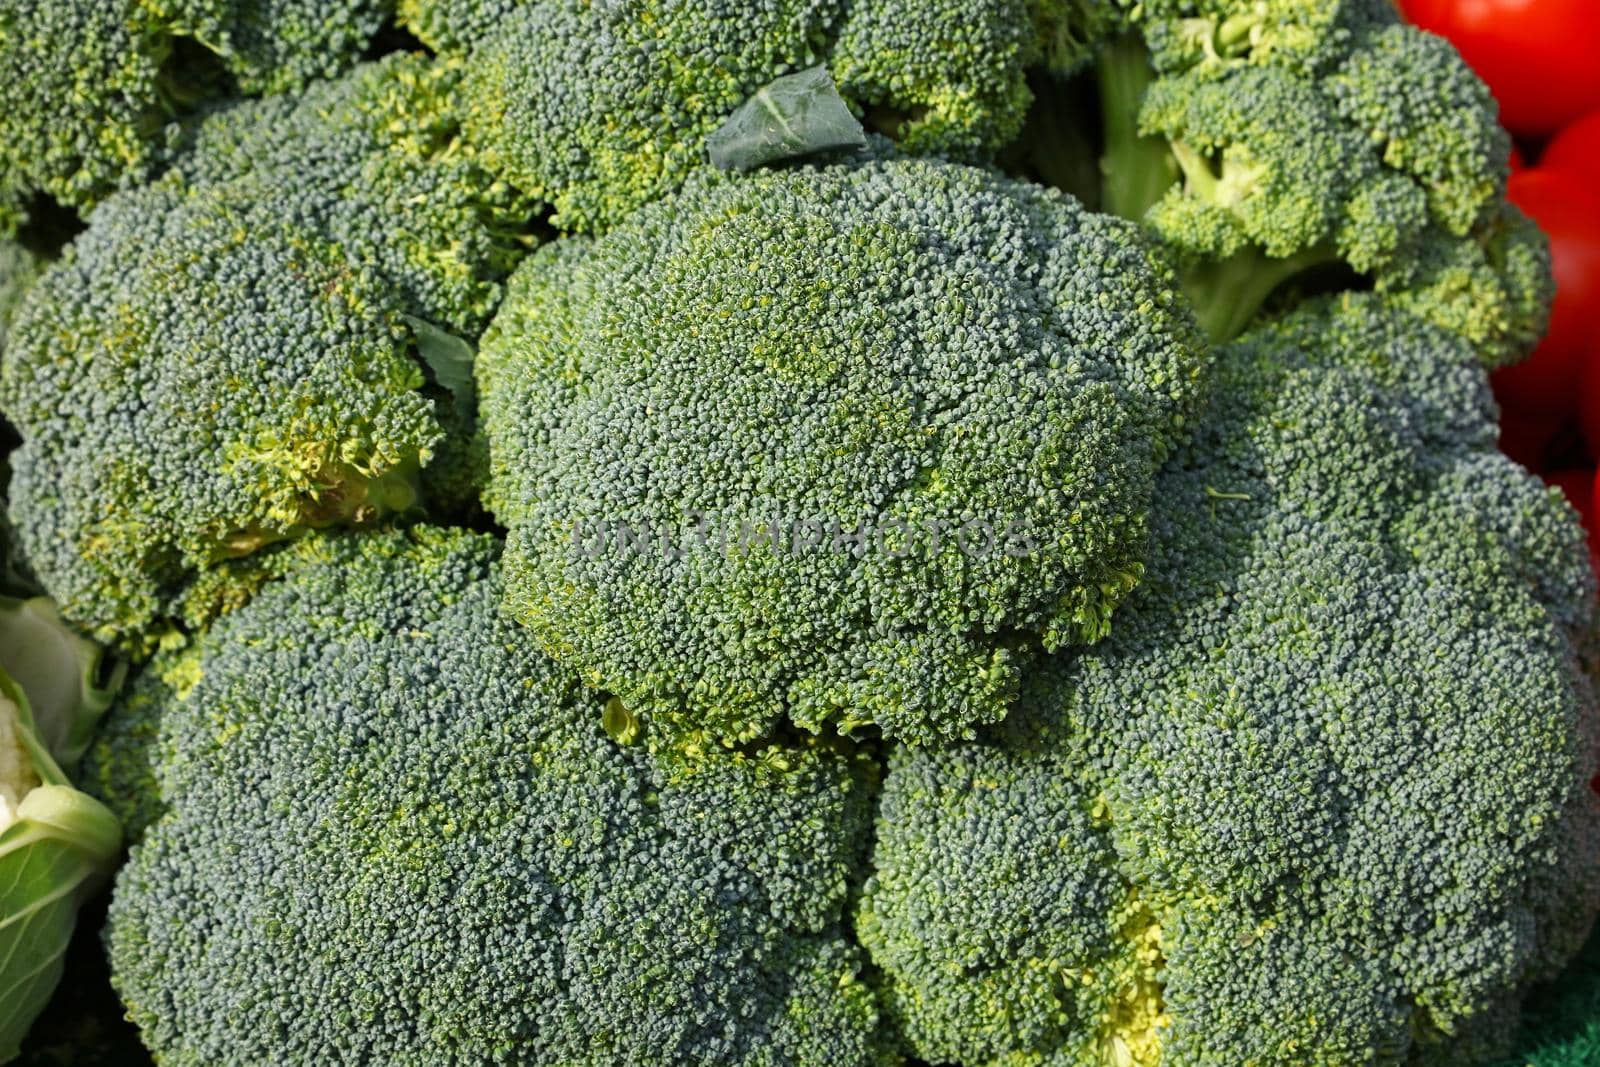 Close up fresh green broccoli on retail display by BreakingTheWalls